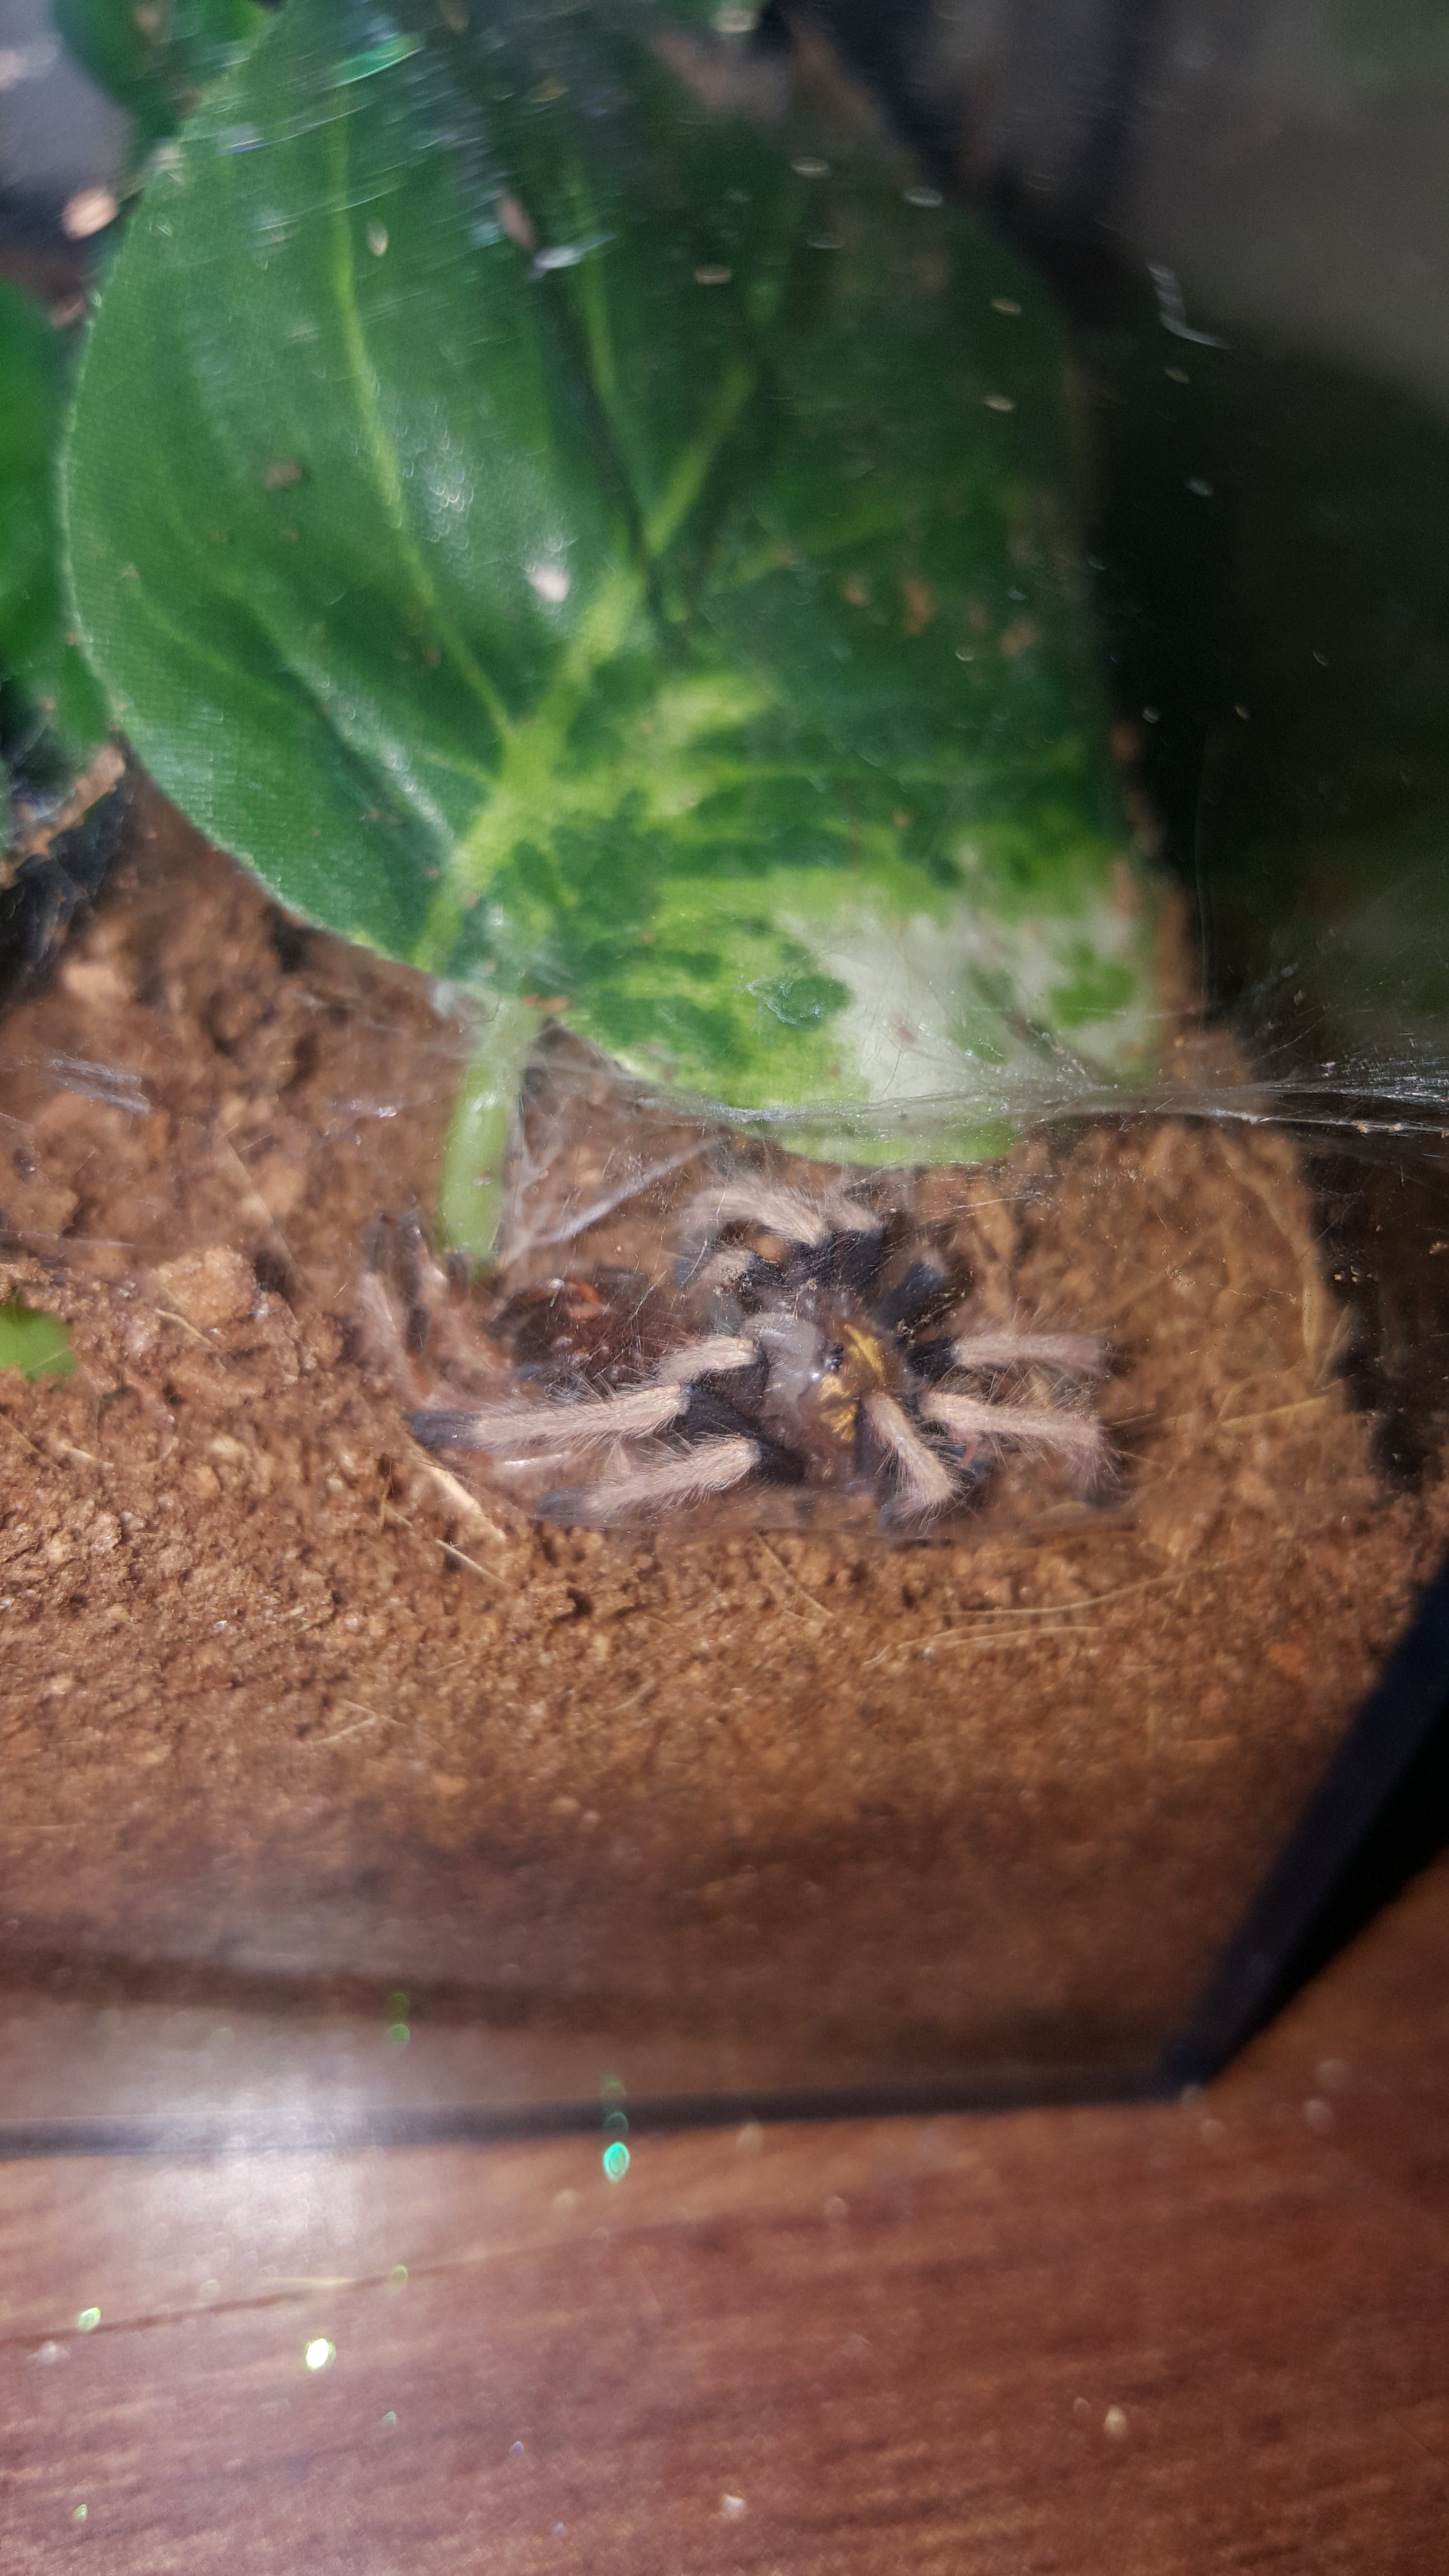 Fresh from the molt